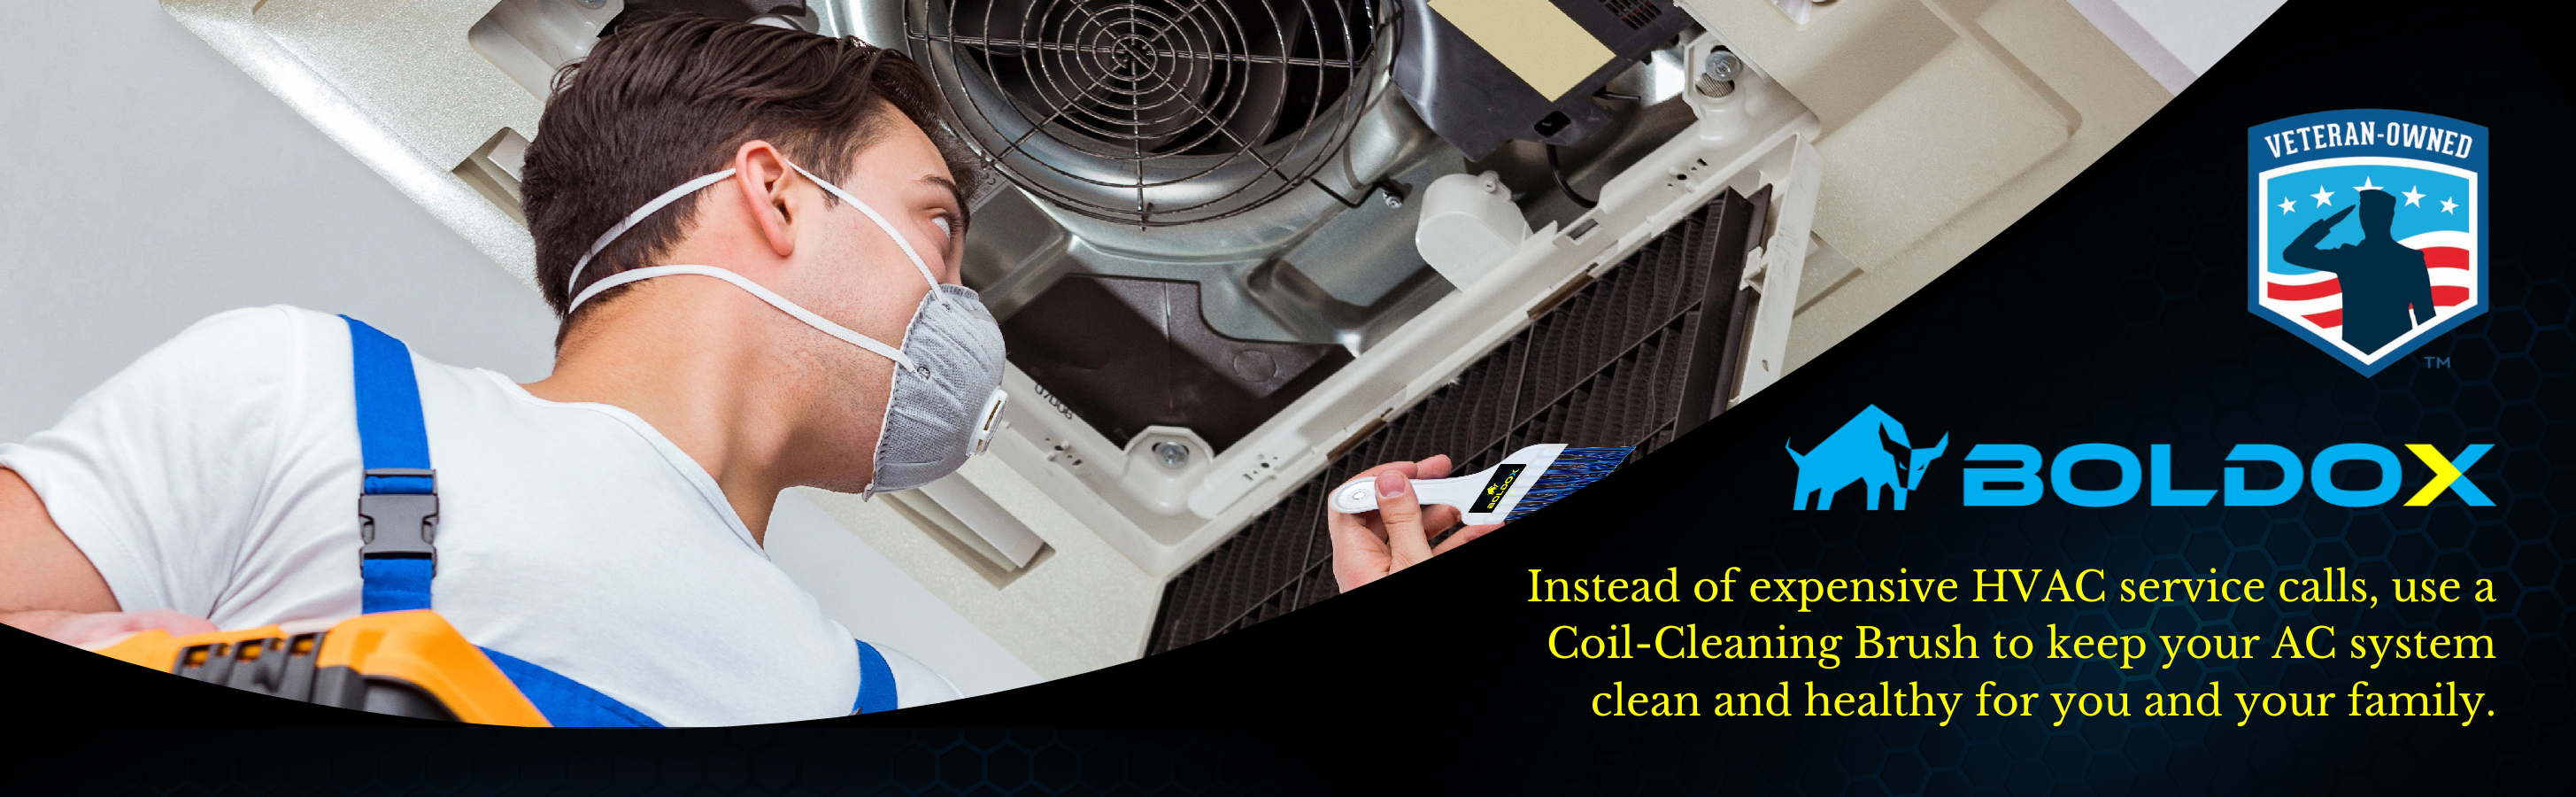 Avoid expensive HVAC service calls when you can easily sweep away dust, dirt, and debris using your Coil-Cleaning Brush to unclog blockages during your air conditioning cleaning routine!